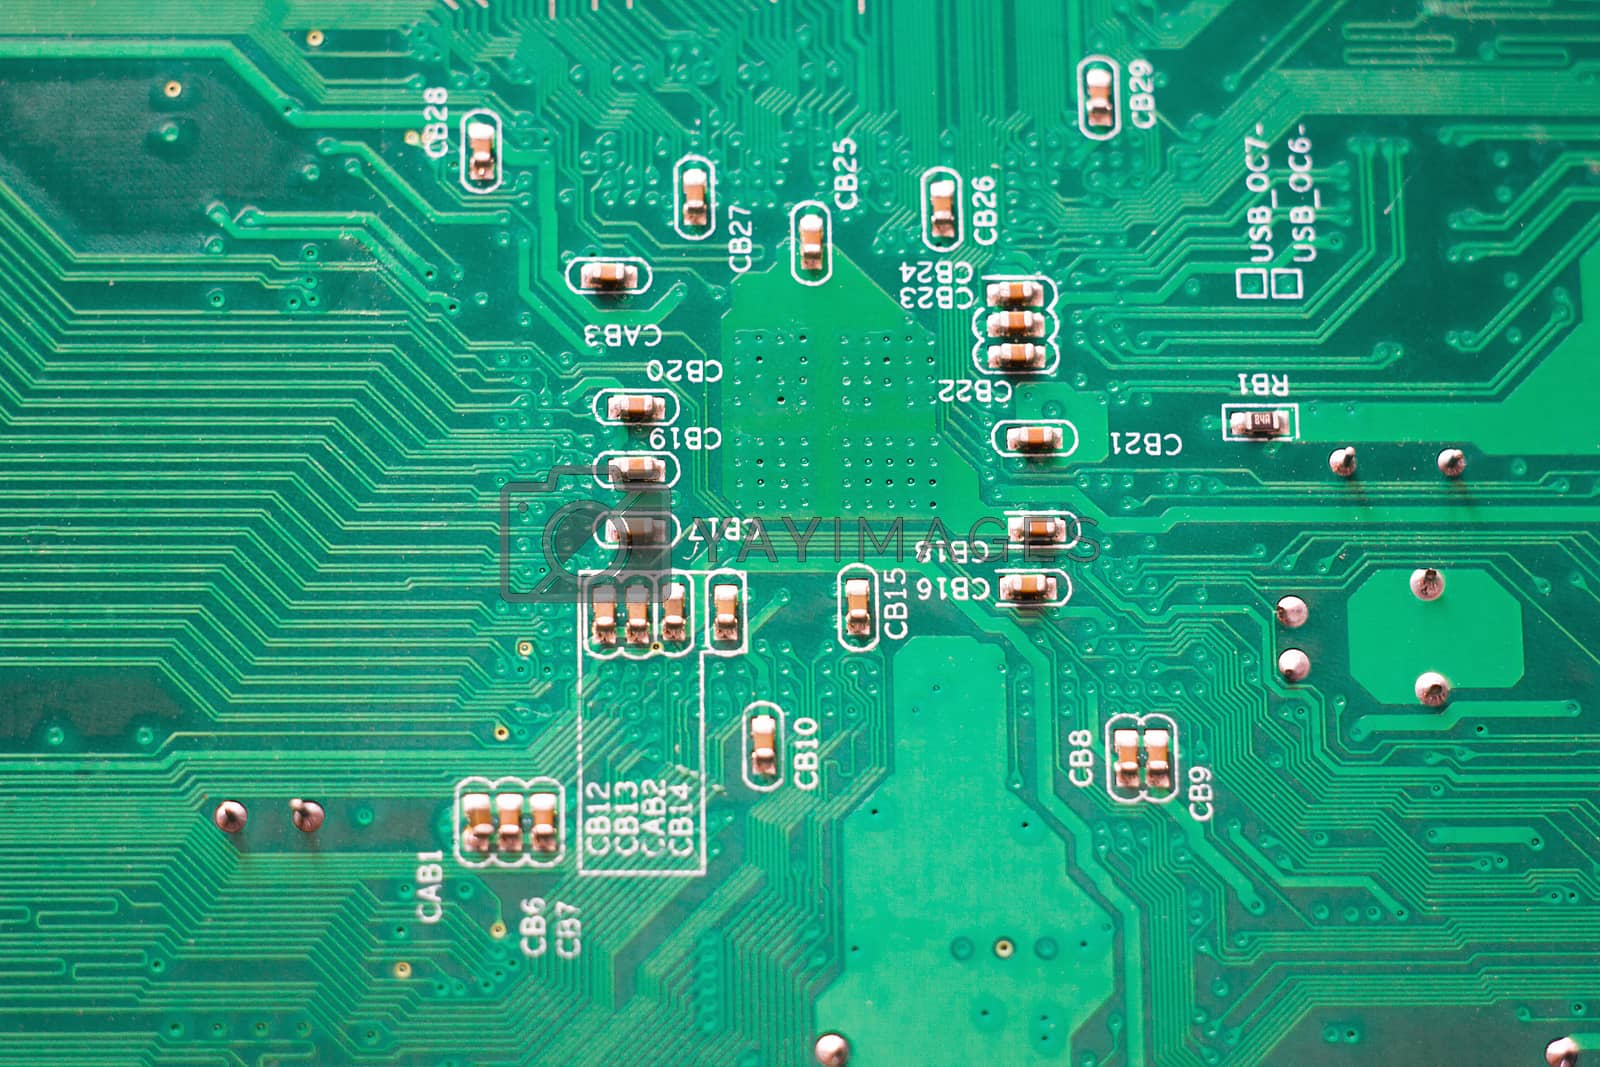 Royalty free image of close-up microcircuit, green pc motherboard by kasynets_olena